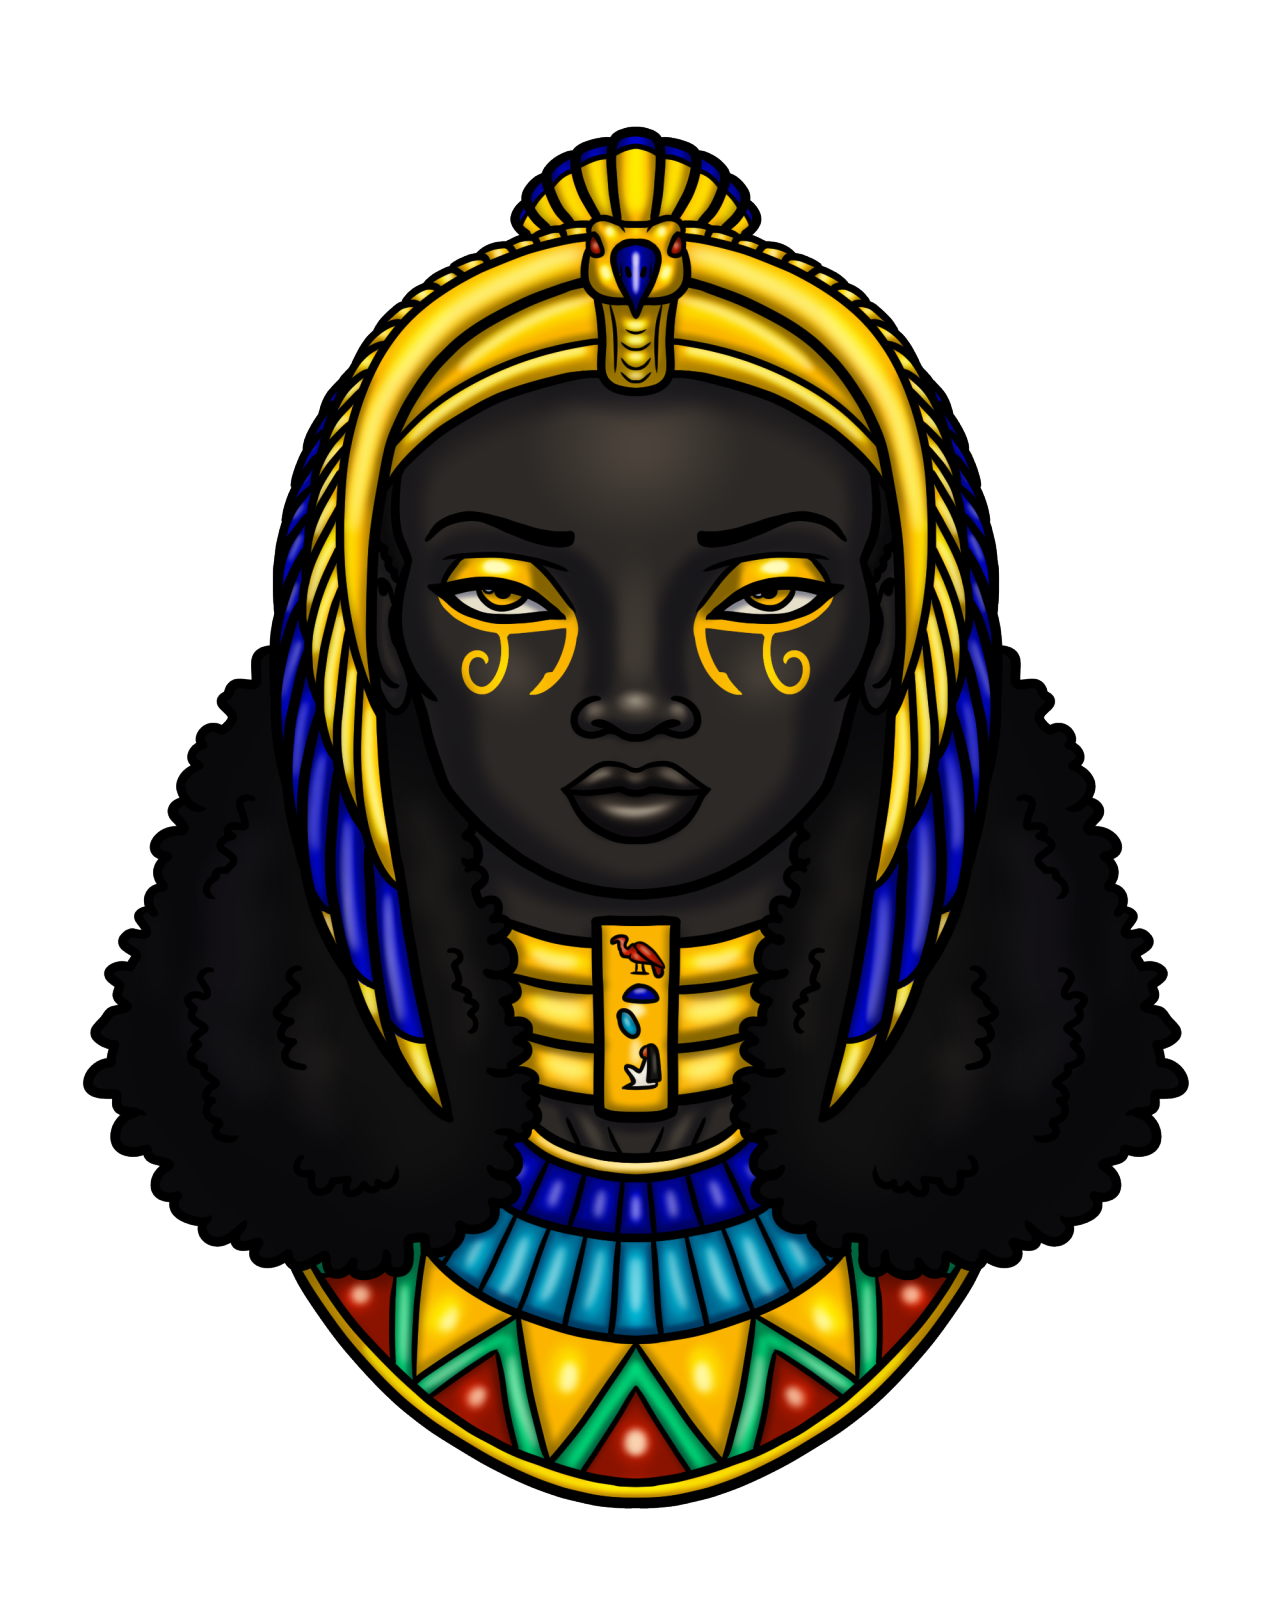 This is a front-view facial portrait of Mut, the “Mother Goddess” of the ancient Egyptian pantheon who rose to prominence during their Middle Kingdom (2055-1650 BC). The hieroglyphs on her choker spell out her name, and her skin is supposed to be literally black like the statues of black diorite the Egyptians would carve. #ancient egypt#egyptian#kemet#egyptian mythology#african mythology#goddess#african#black woman #woman of color #dark skin#woc#portrait#face#digital art#art